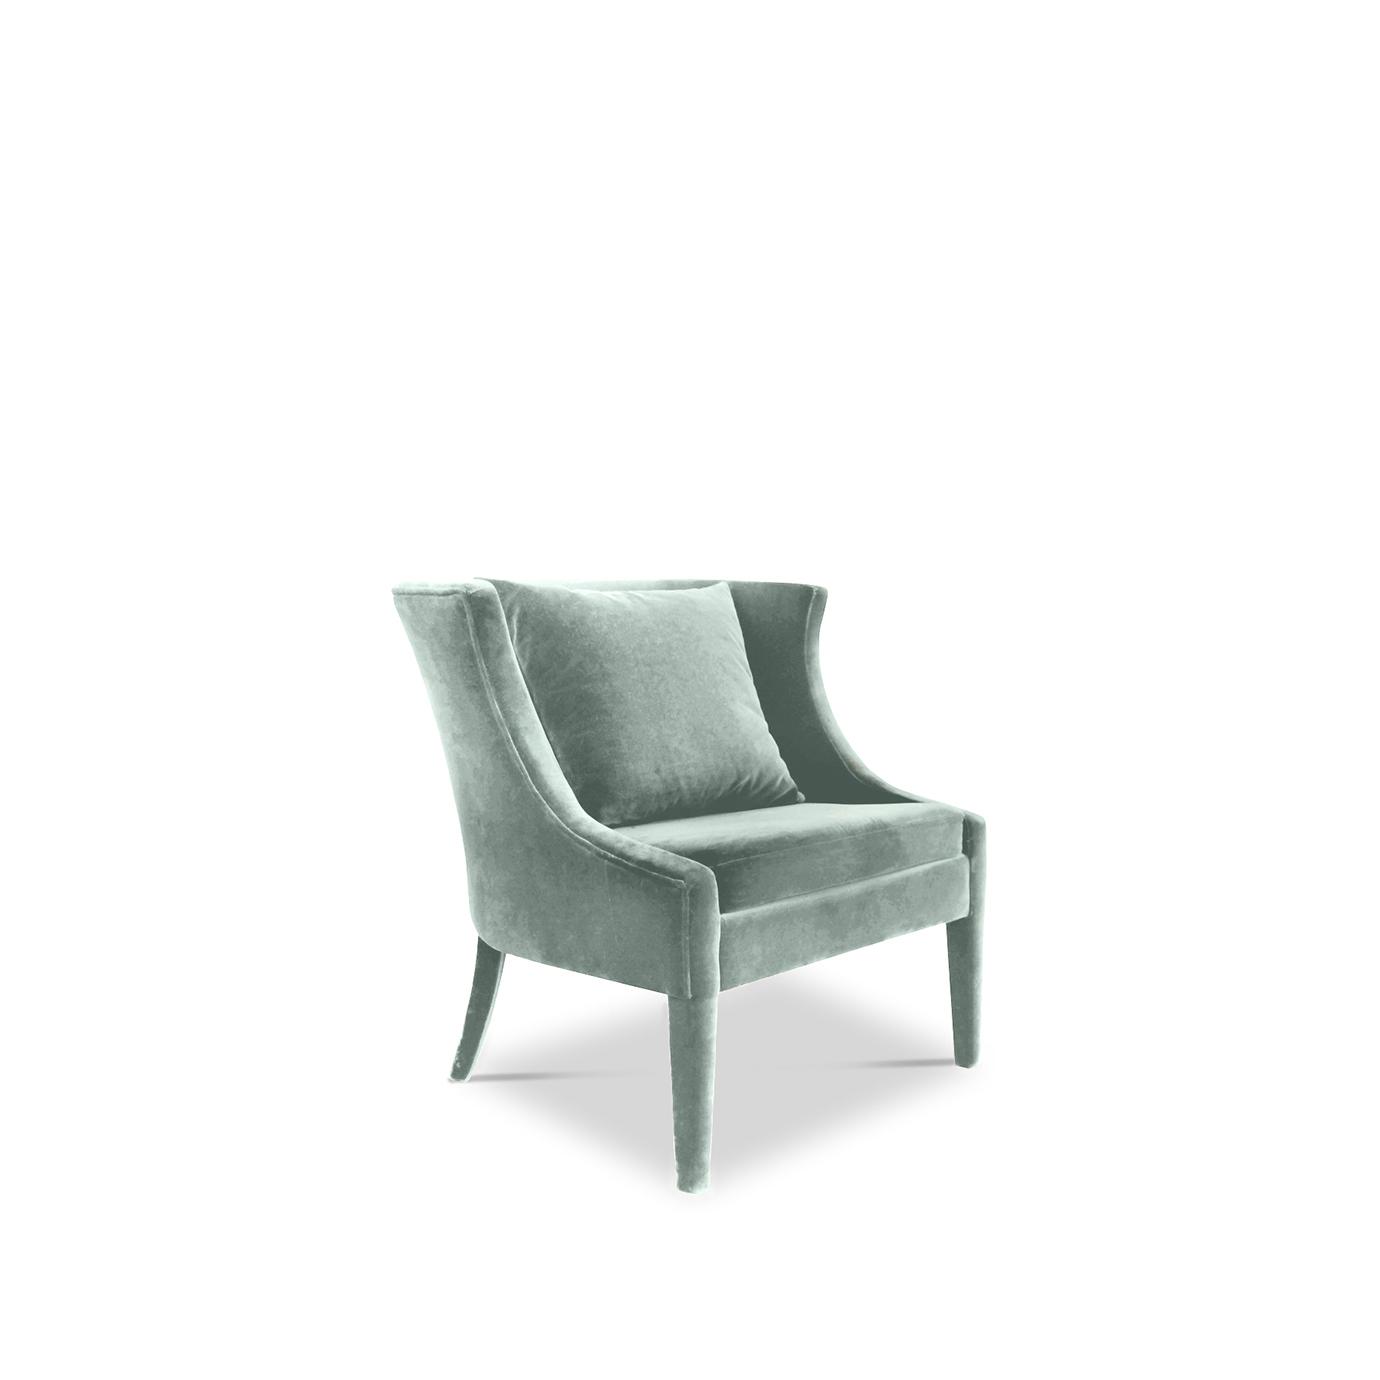 ATHINA CHAIR